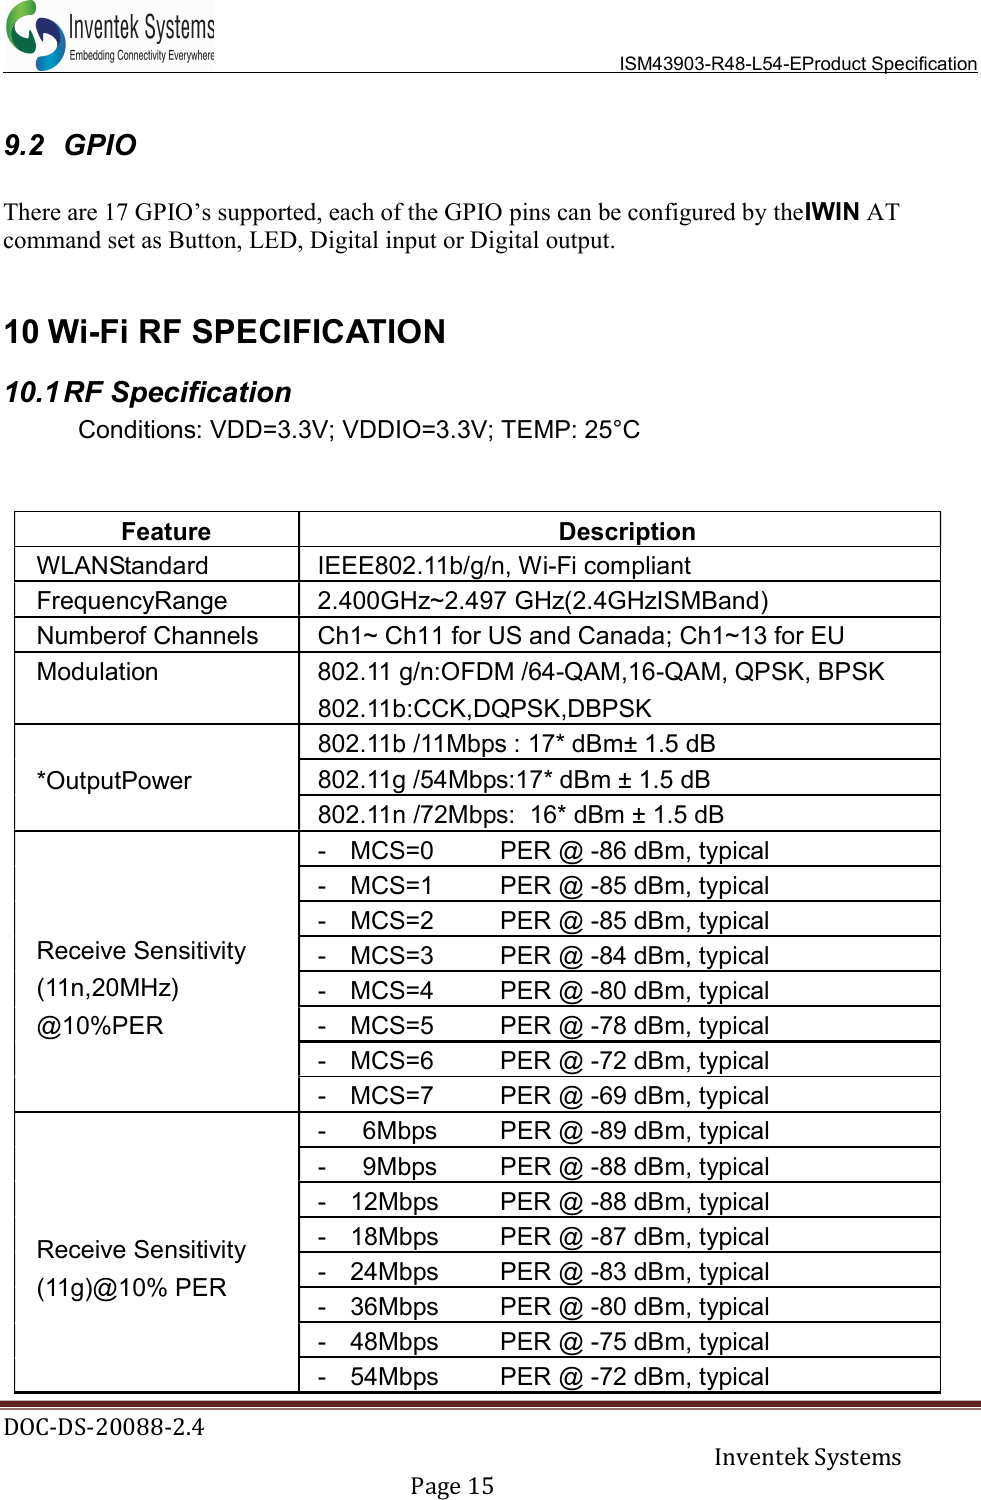   ISM43903-R48-L54-EProduct Specification DOC-DS-20088-2.4     Inventek Systems   Page 15  9.2  GPIO  There are 17 GPIO’s supported, each of the GPIO pins can be configured by theIWIN AT command set as Button, LED, Digital input or Digital output.    10 Wi-Fi RF SPECIFICATION 10.1 RF Specification Conditions: VDD=3.3V; VDDIO=3.3V; TEMP: 25°C  Feature Description WLANStandard  IEEE802.11b/g/n, Wi-Fi compliant FrequencyRange  2.400GHz~2.497 GHz(2.4GHzISMBand) Numberof Channels  Ch1~ Ch11 for US and Canada; Ch1~13 for EU Modulation  802.11 g/n:OFDM /64-QAM,16-QAM, QPSK, BPSK 802.11b:CCK,DQPSK,DBPSK   *OutputPower 802.11b /11Mbps : 17* dBm± 1.5 dB 802.11g /54Mbps:17* dBm ± 1.5 dB 802.11n /72Mbps:  16* dBm ± 1.5 dB      Receive Sensitivity (11n,20MHz) @10%PER -  MCS=0  PER @ -86 dBm, typical -  MCS=1  PER @ -85 dBm, typical -  MCS=2  PER @ -85 dBm, typical -  MCS=3  PER @ -84 dBm, typical -  MCS=4  PER @ -80 dBm, typical -  MCS=5  PER @ -78 dBm, typical -  MCS=6  PER @ -72 dBm, typical -  MCS=7  PER @ -69 dBm, typical       Receive Sensitivity (11g)@10% PER -  6Mbps  PER @ -89 dBm, typical -  9Mbps  PER @ -88 dBm, typical -  12Mbps  PER @ -88 dBm, typical -  18Mbps  PER @ -87 dBm, typical -  24Mbps  PER @ -83 dBm, typical -  36Mbps  PER @ -80 dBm, typical -  48Mbps  PER @ -75 dBm, typical -  54Mbps  PER @ -72 dBm, typical 